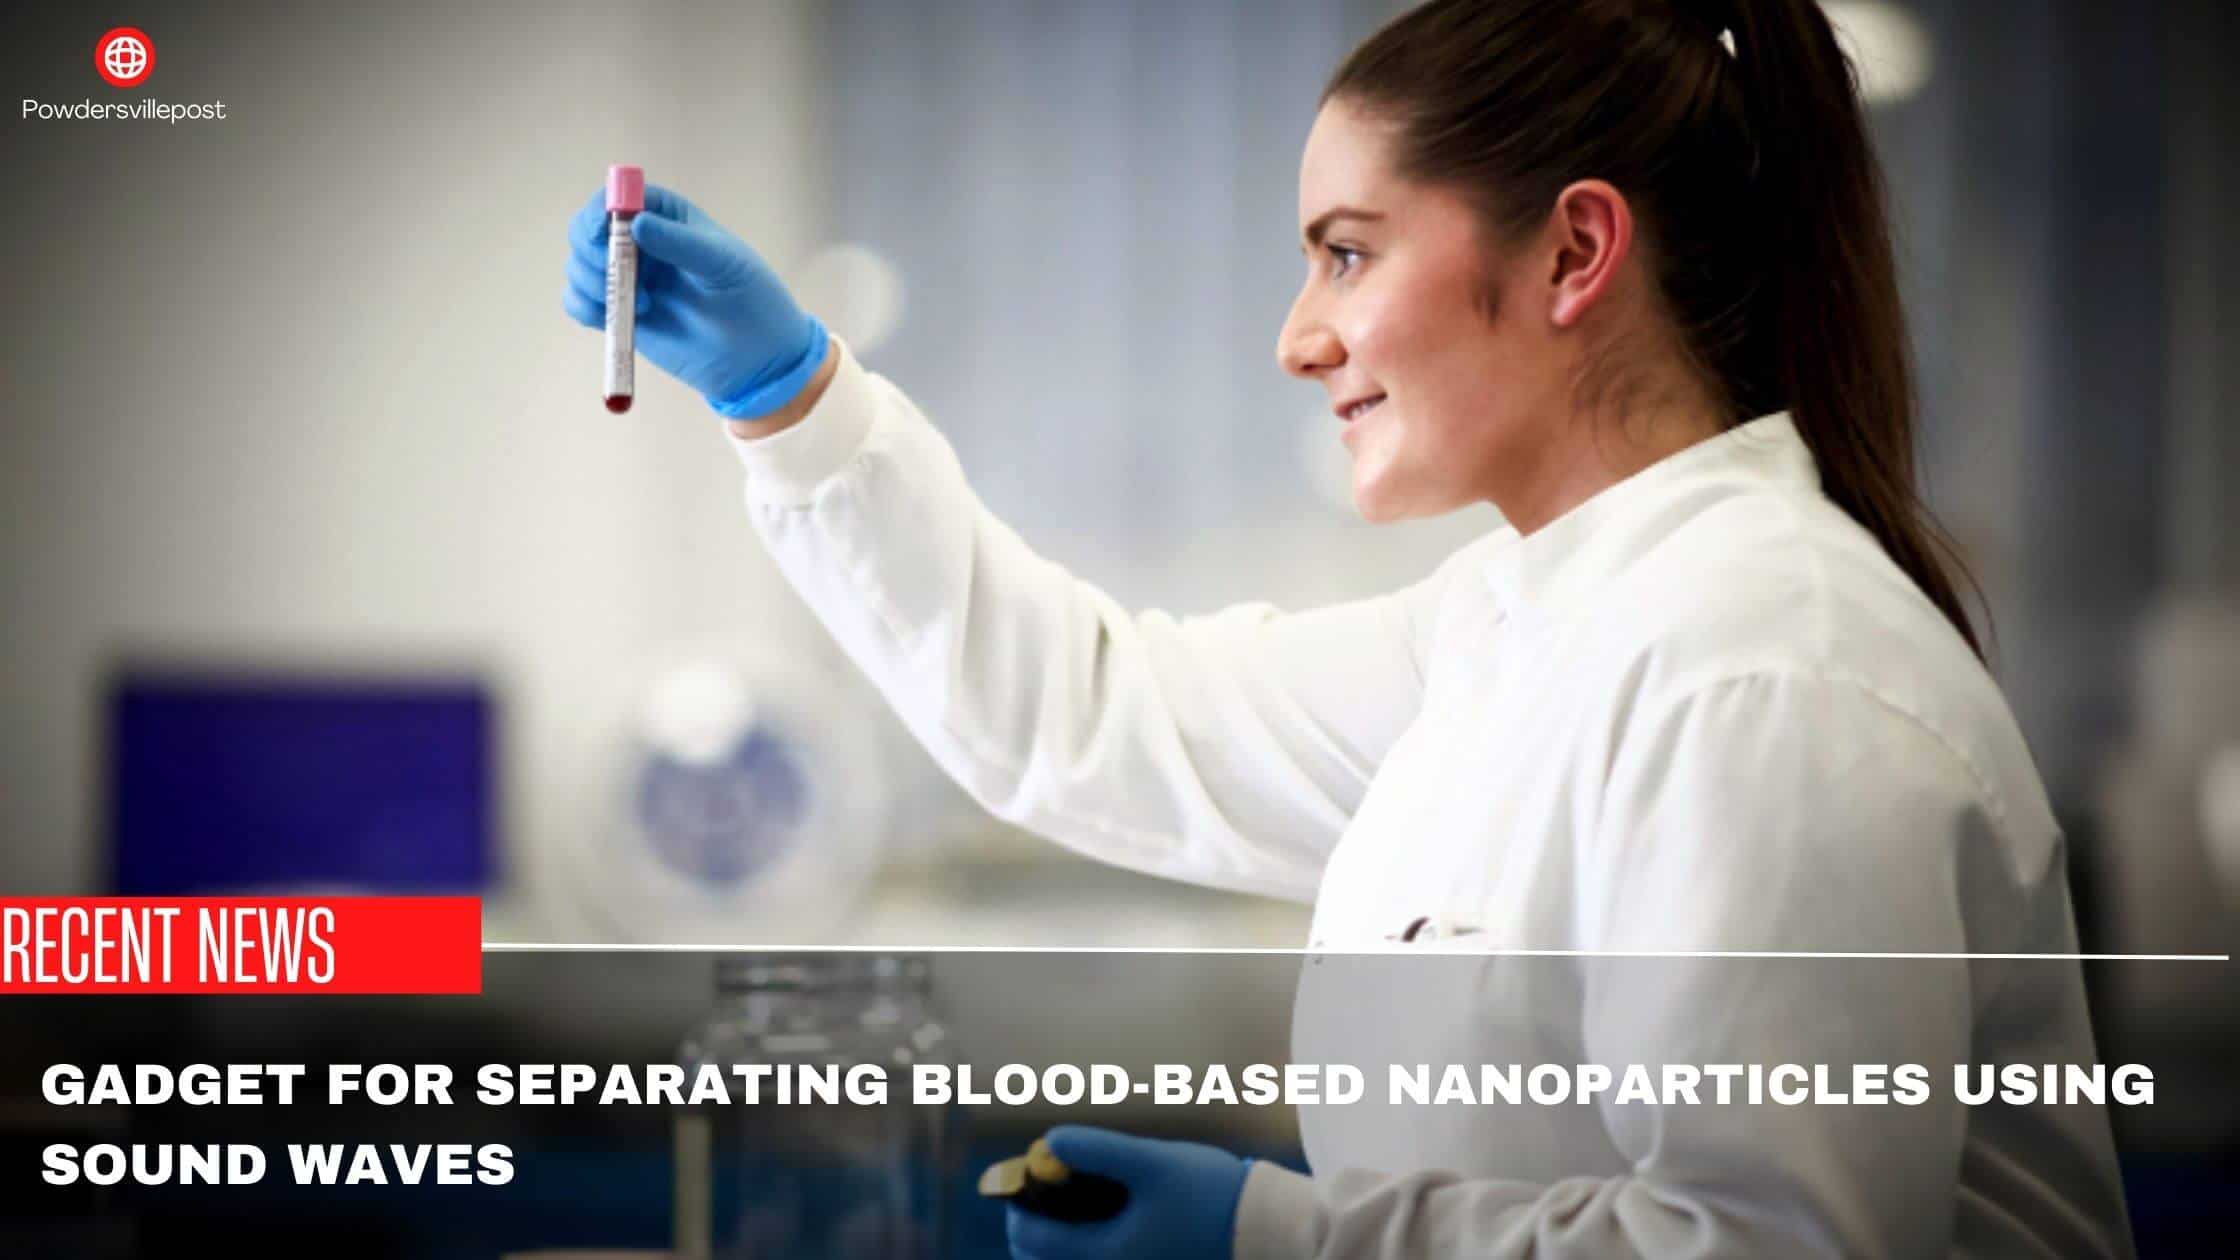 Gadget For Separating Blood-Based Nanoparticles Using Sound Waves